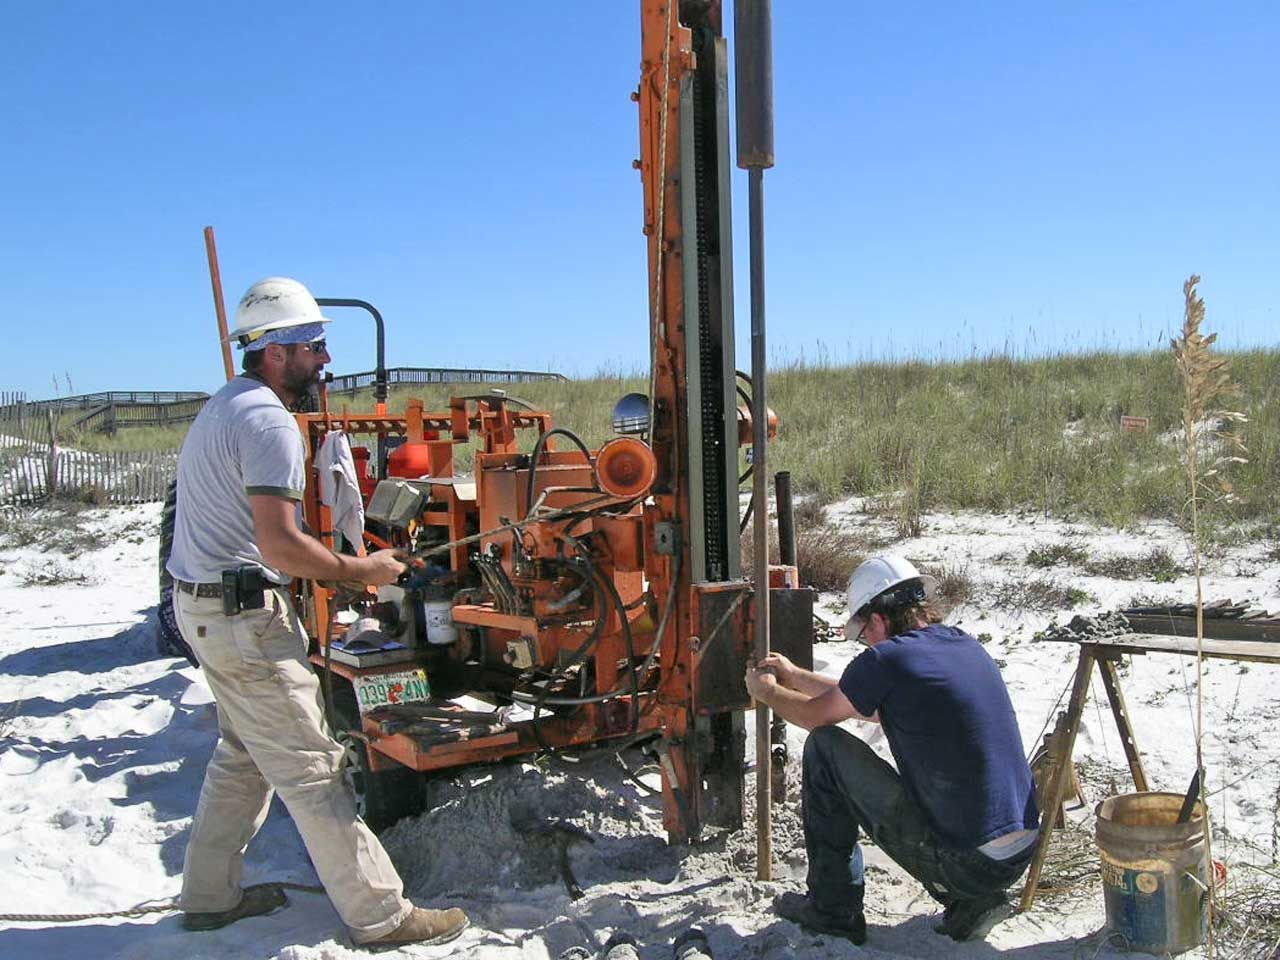 Acorn Construction builds piling homes on Navarre Beach